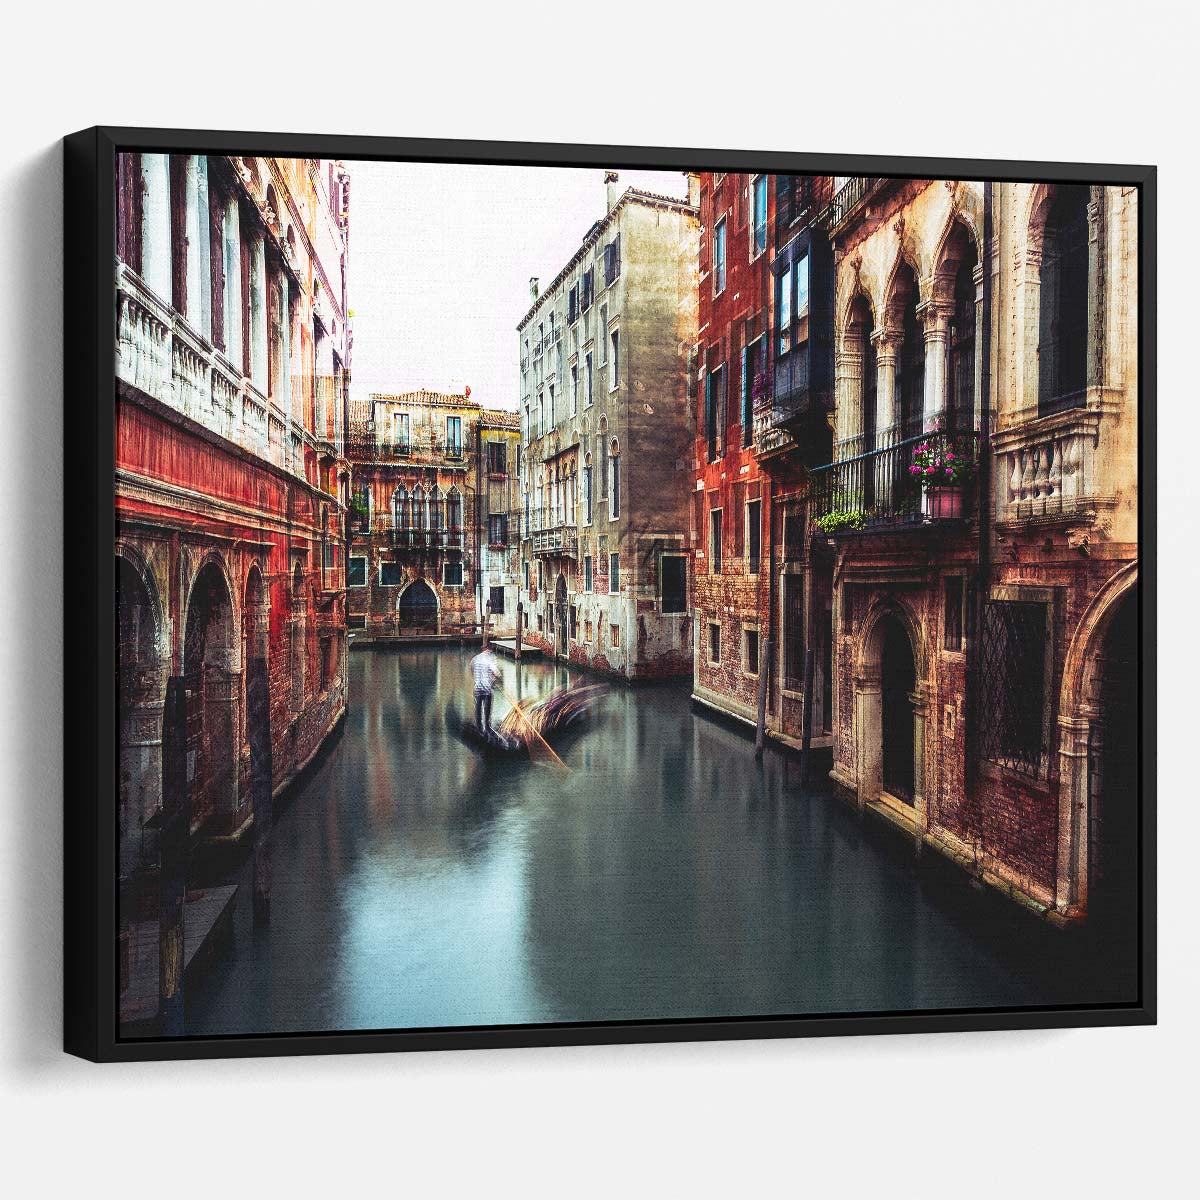 Venice Gondola Journey Historic Italy Canal Wall Art by Luxuriance Designs. Made in USA.